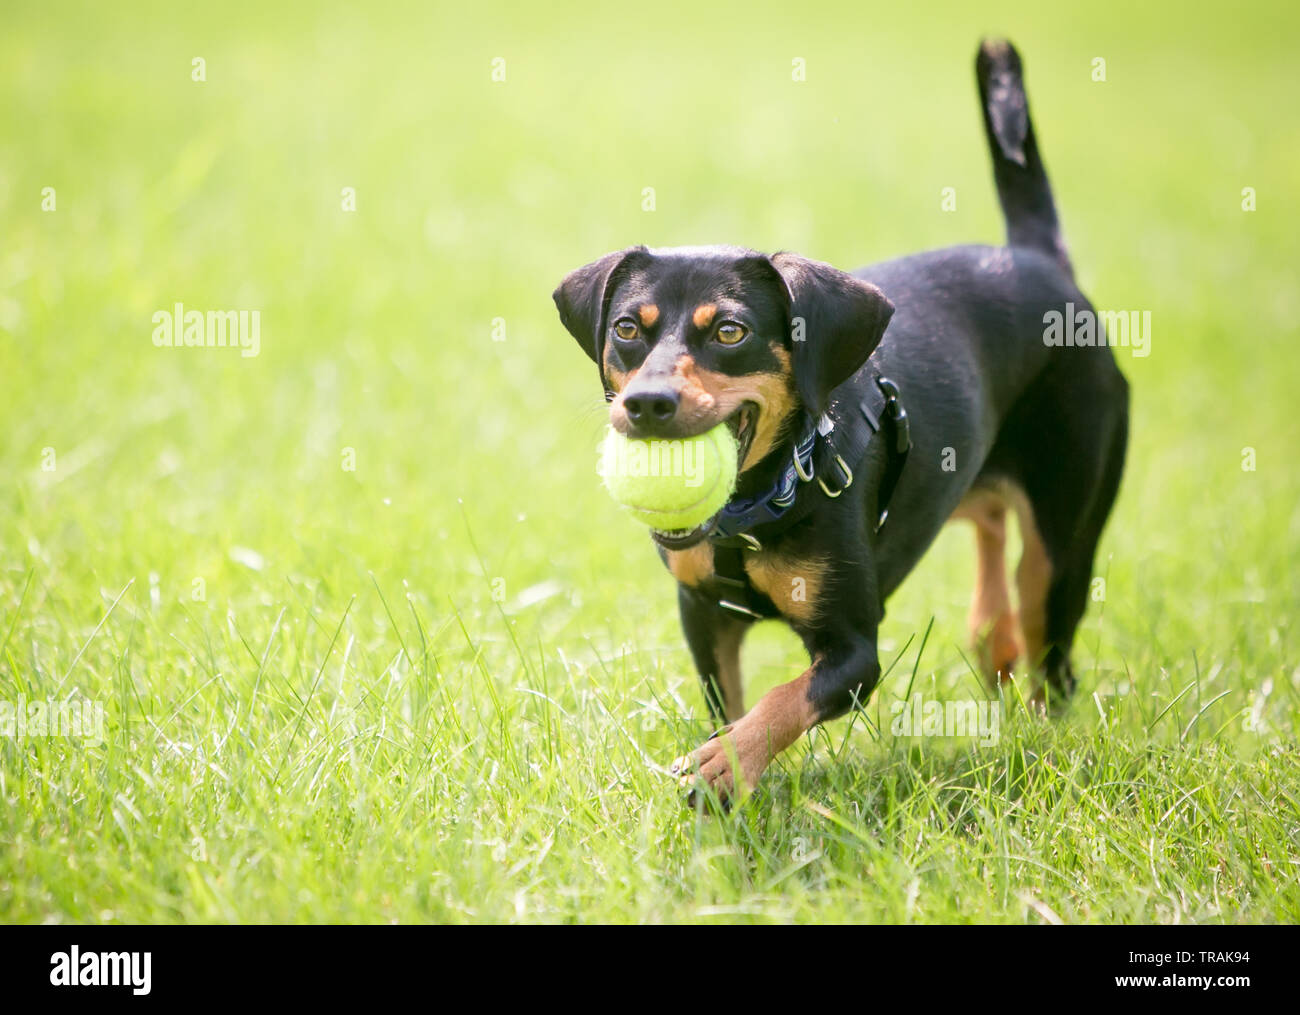 A playful black and red Dachshund mixed breed dog holding a ball in its mouth Stock Photo